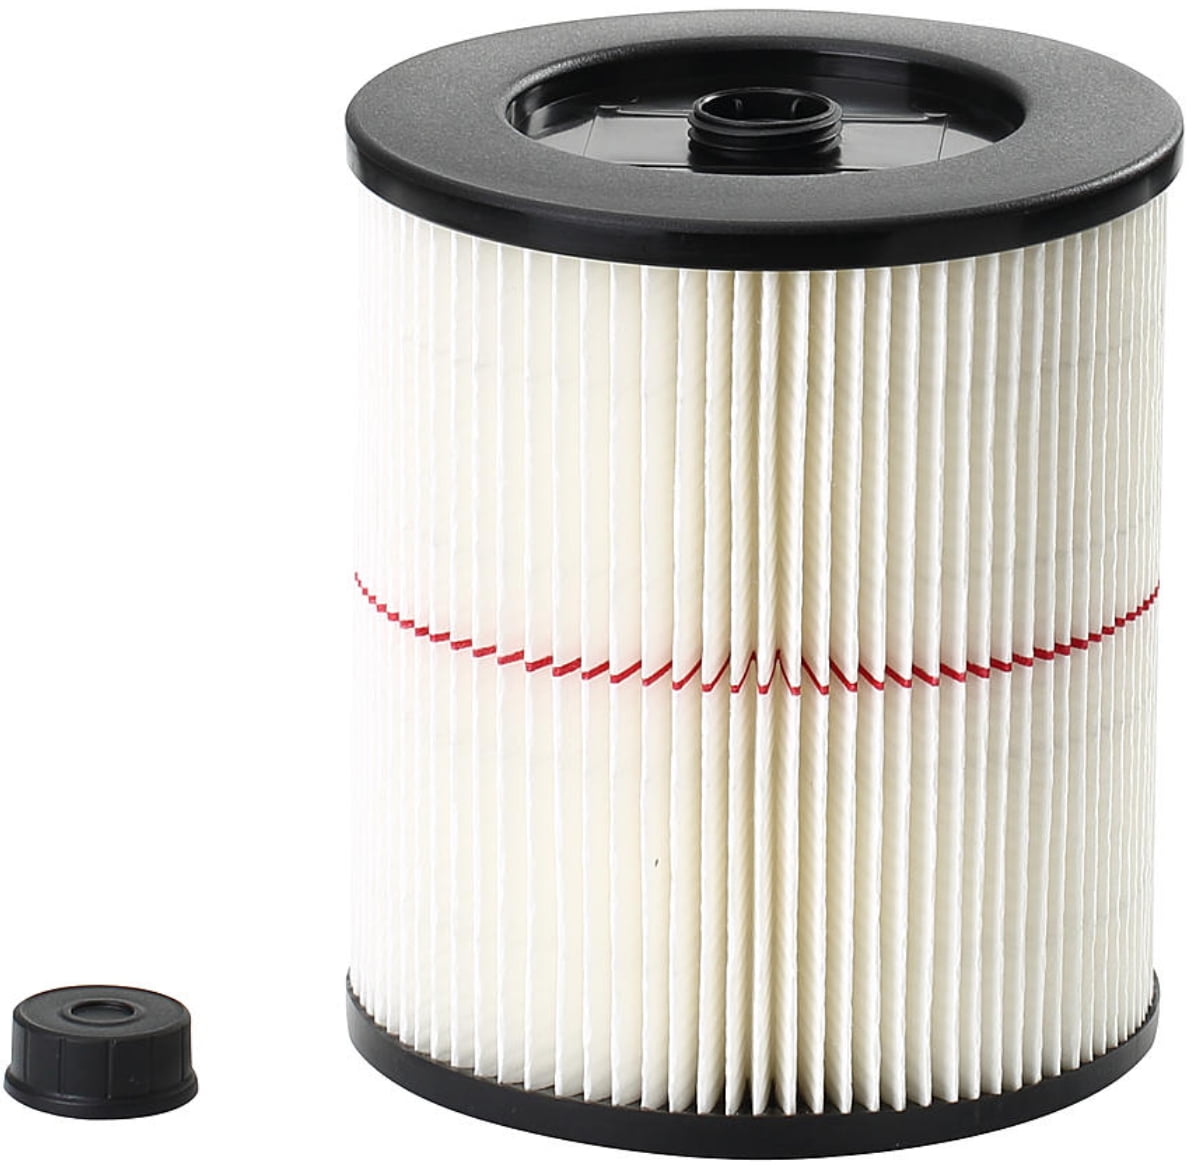 Pack of 4 Craftsman Replacement Filters Fit 2 & 2.5GAL.WET/DRY VAC NO Band !!